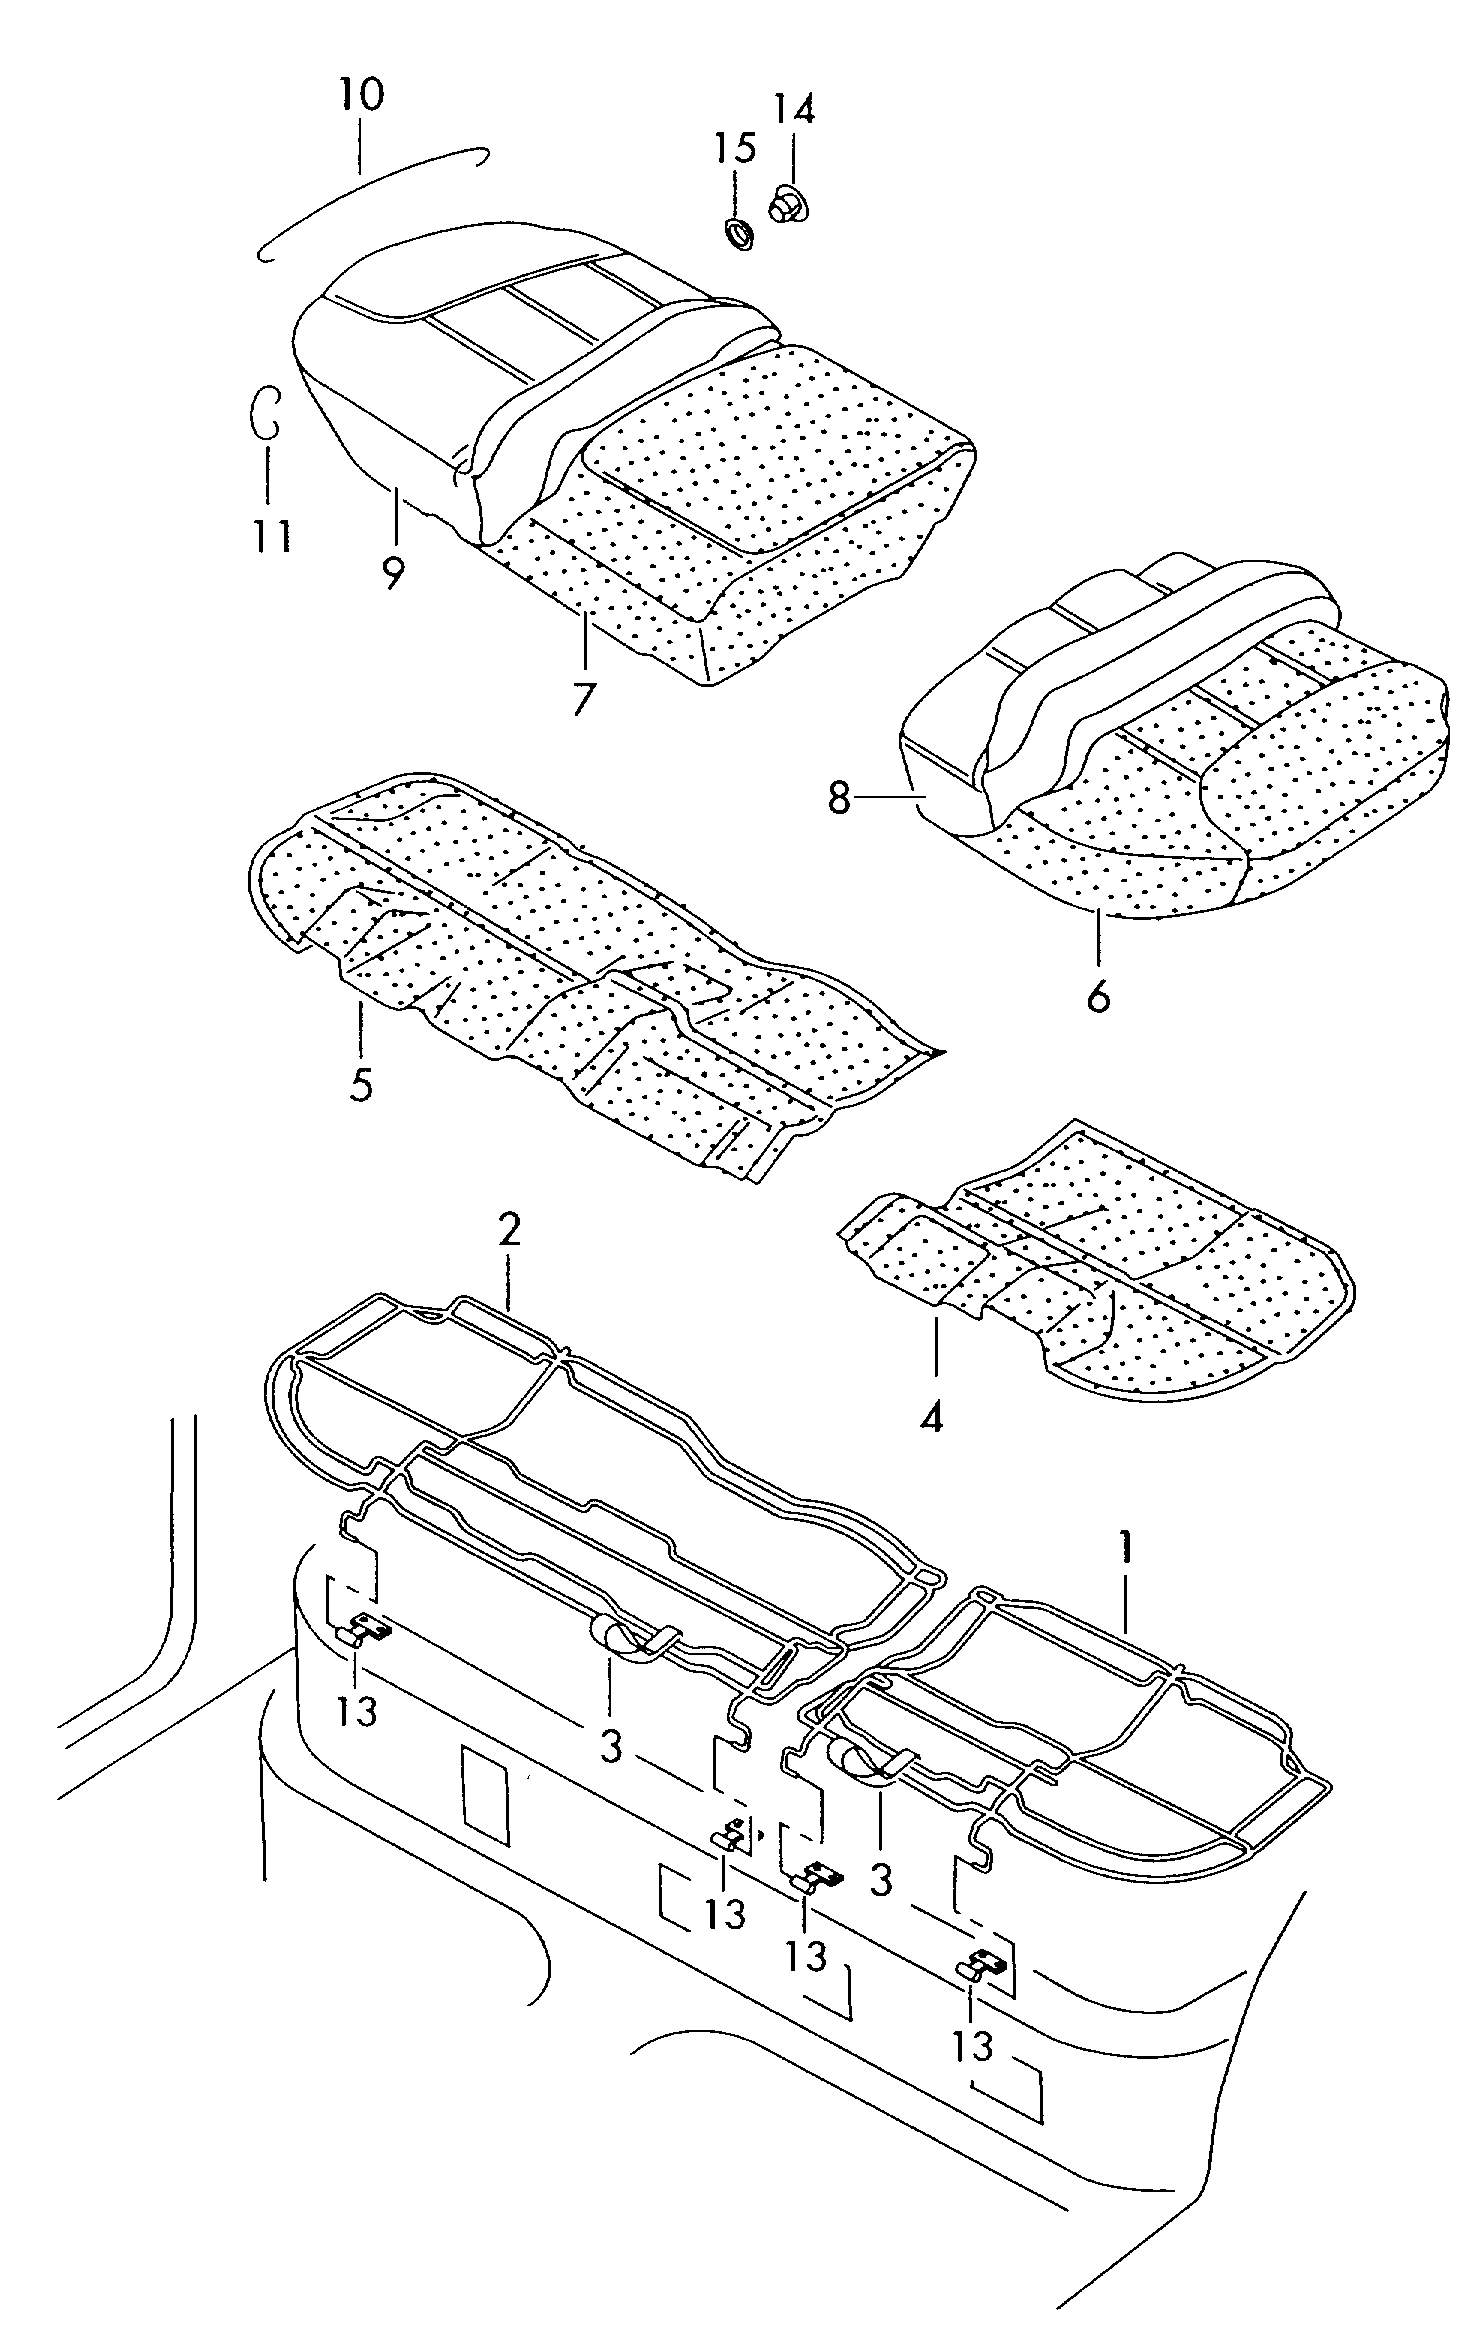 seat, divided rear - Beetle - be